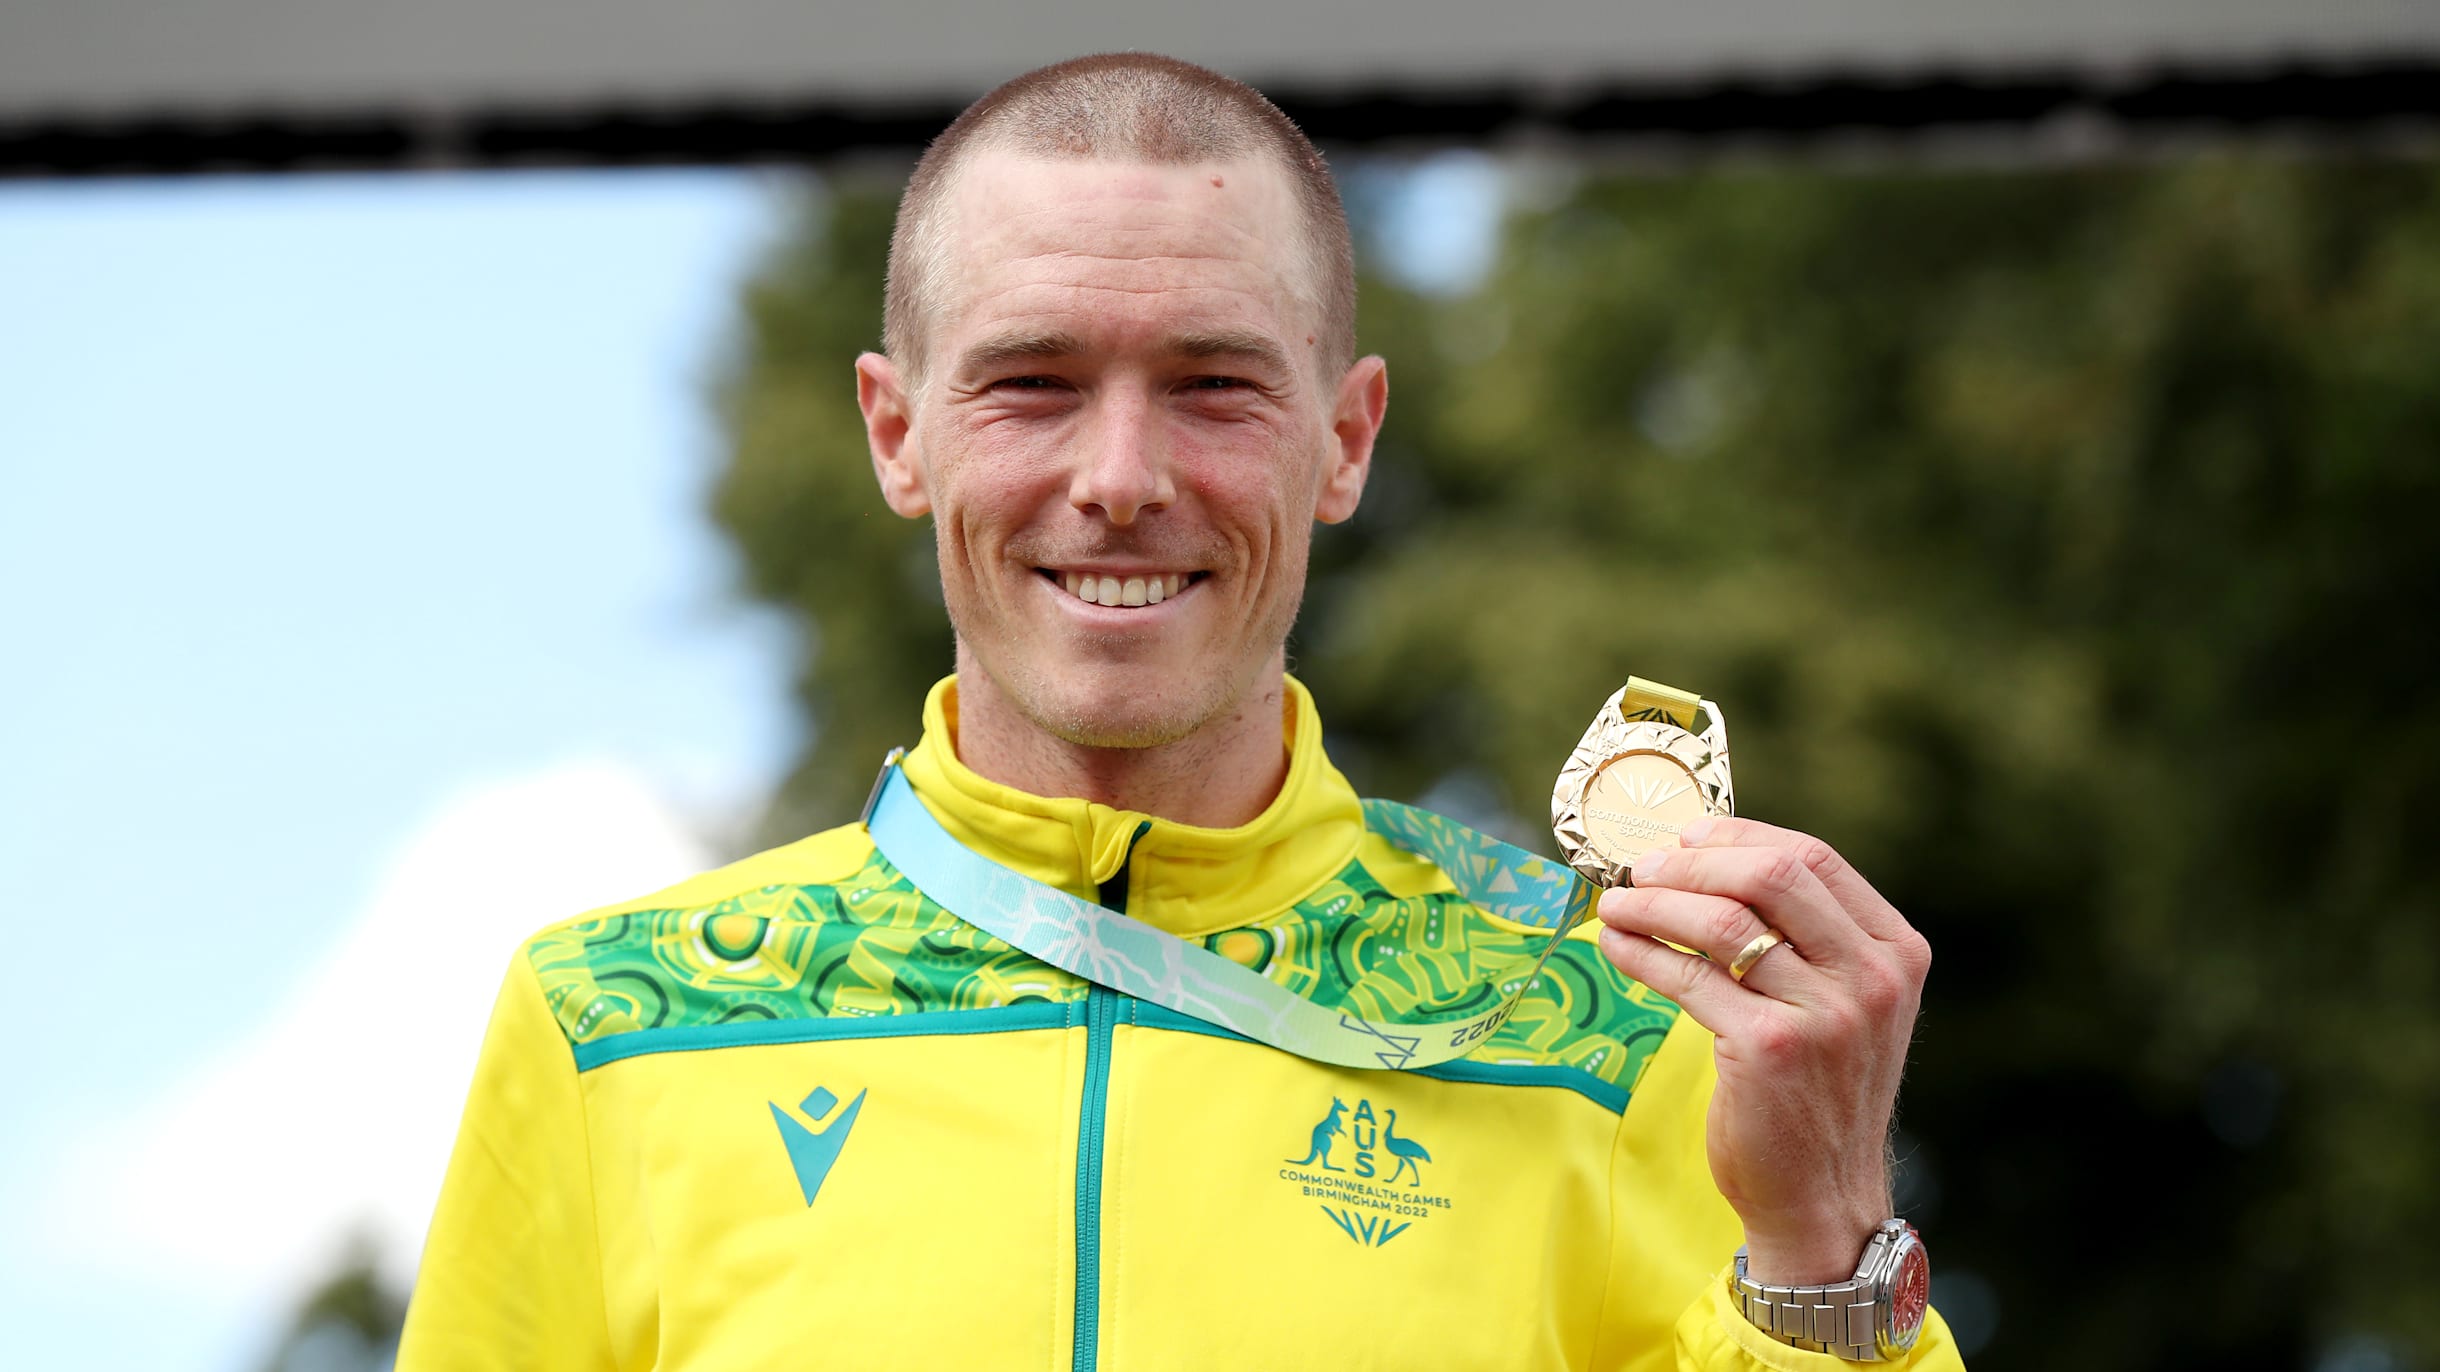 2022 Commonwealth Games Rohan Dennis wins road cycling mens time trial